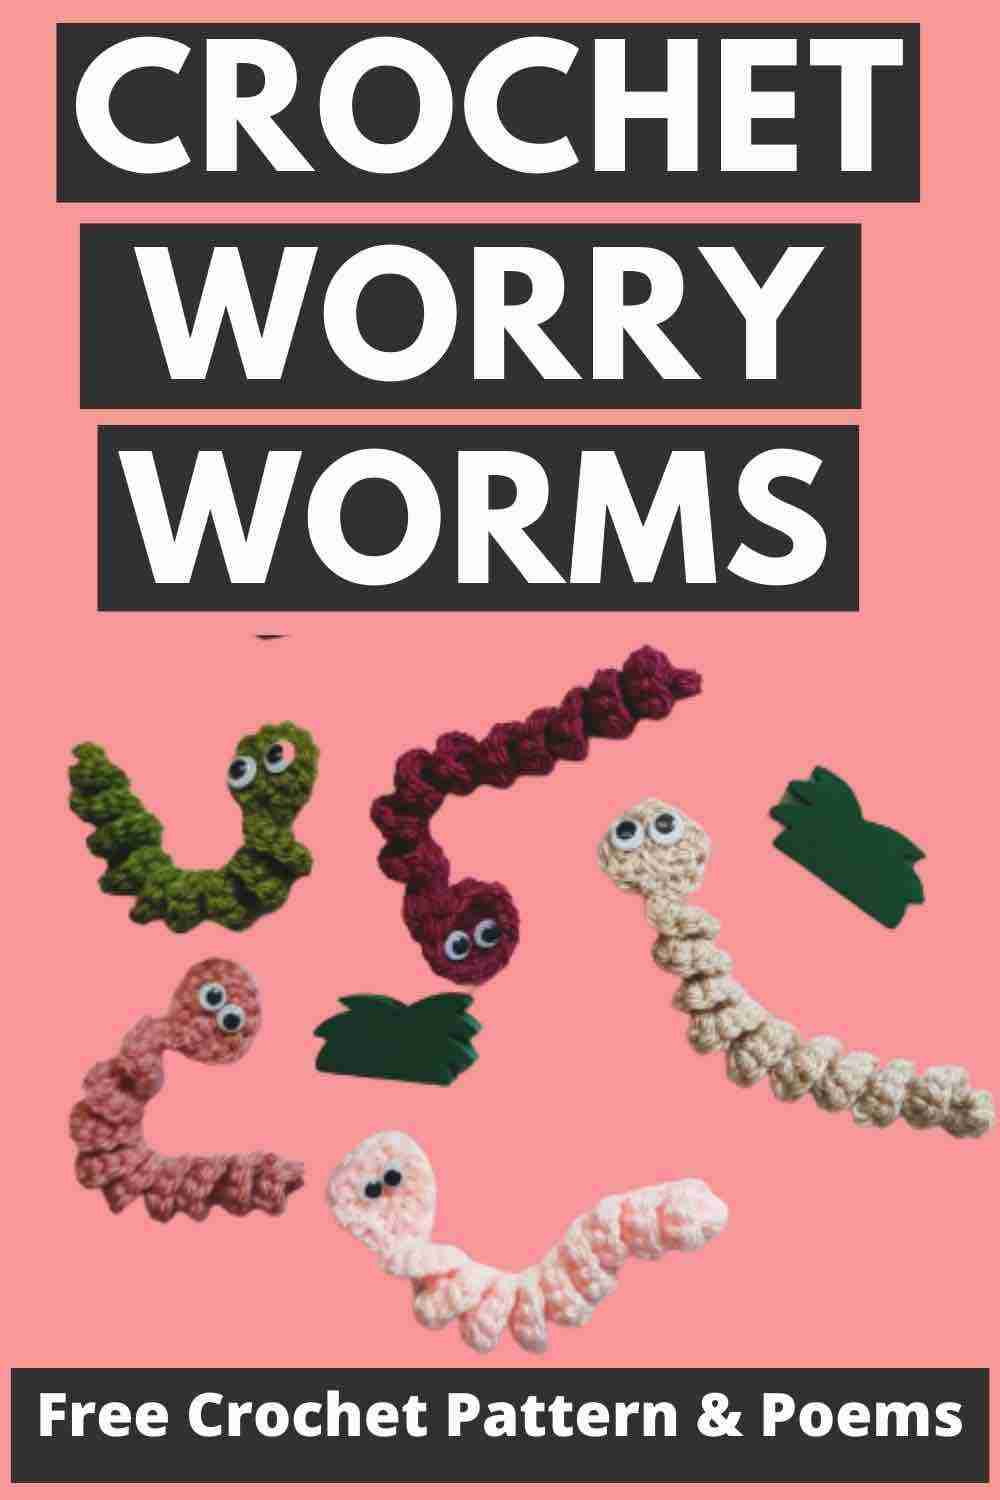 Crochet worry worms pattern and poems